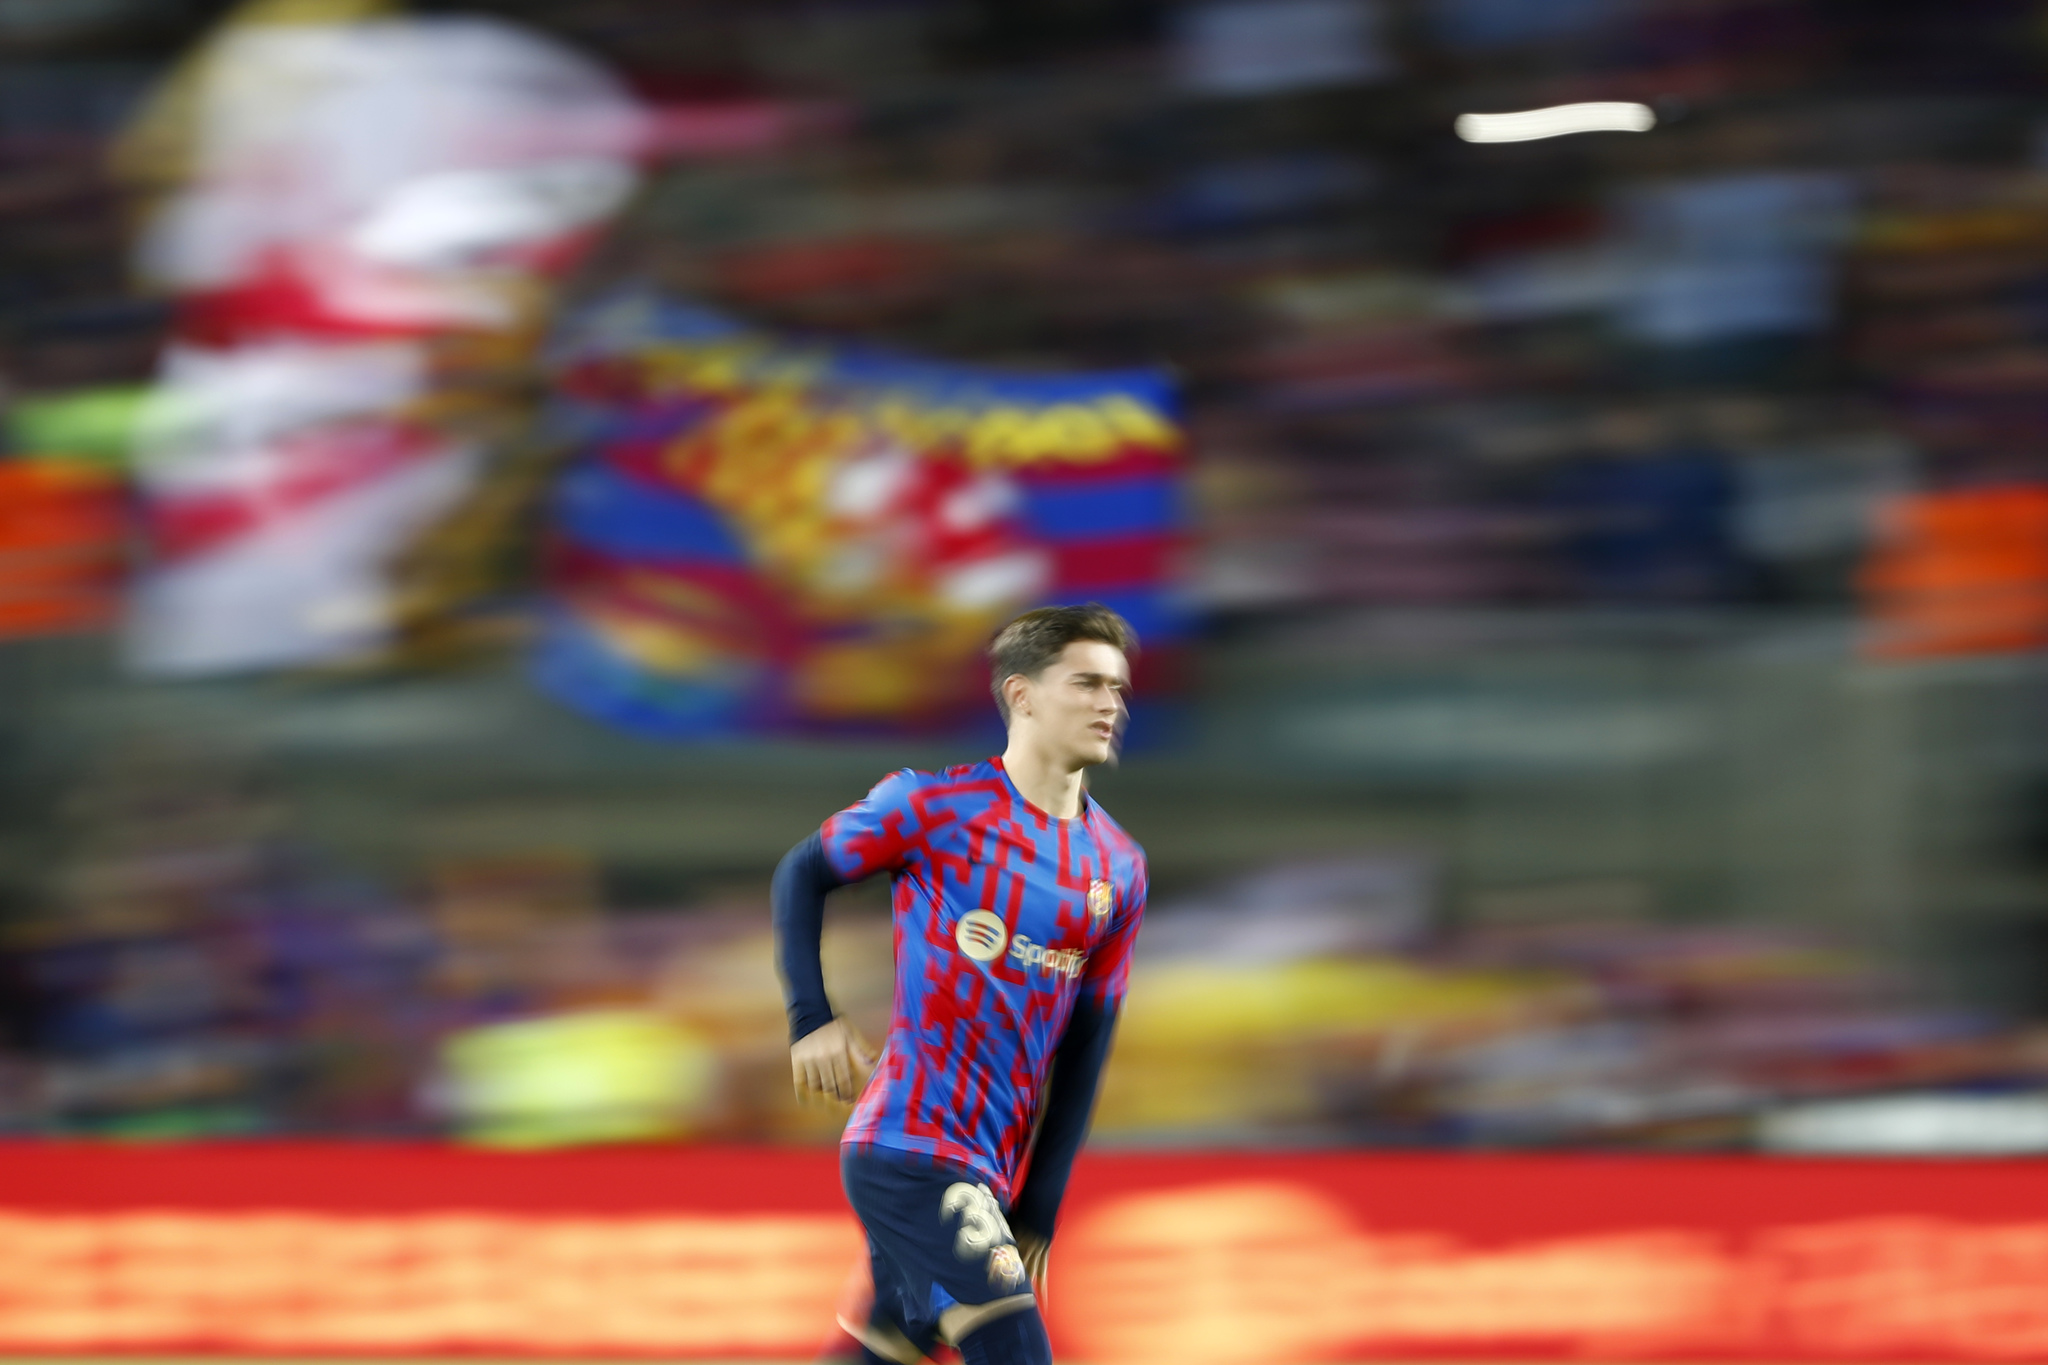 In this photo taken with slow shutter speed,  lt;HIT gt;Barcelona lt;/HIT gt;'s Gavi warms up prior to a Spanish La Liga soccer match between  lt;HIT gt;Barcelona lt;/HIT gt; and Athletic Club at the Camp Nou stadium in  lt;HIT gt;Barcelona lt;/HIT gt;, Spain, Sunday, Oct. 23, 2022. (AP Photo/Joan Monfort)